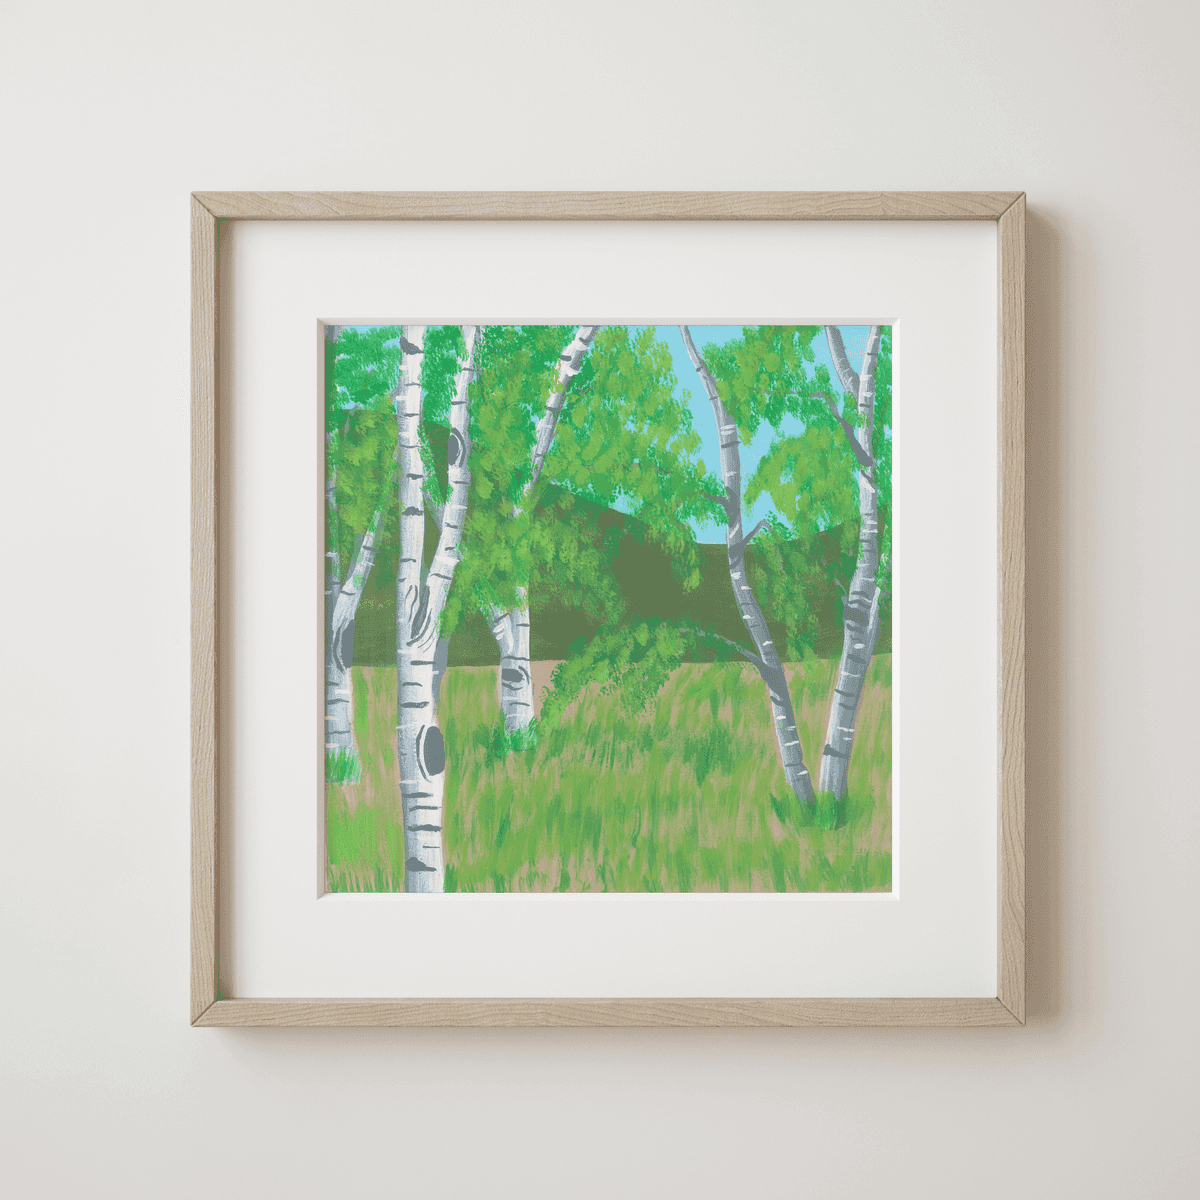 Wood Pigeons in Dublin - Whispering Birches in the Summer Meadow Fine Art Print - nature soundscape art - earth.fm